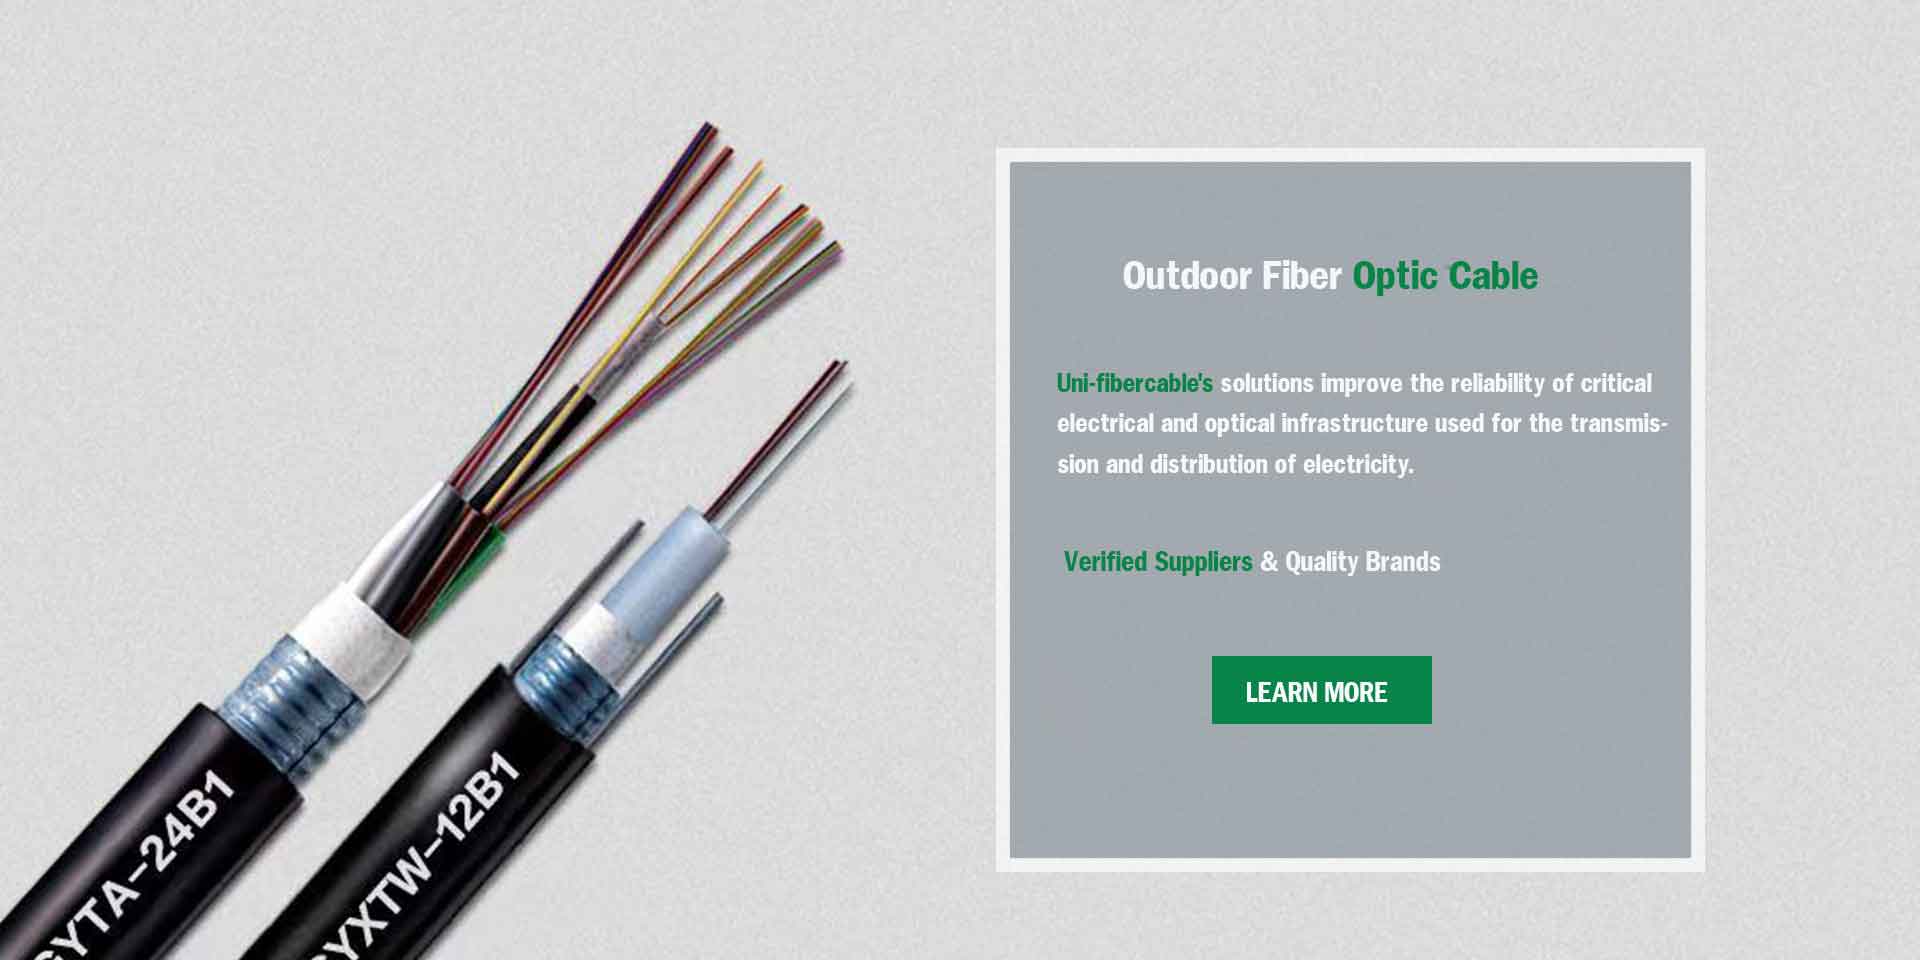 OUTDOOR FIBER OPTIC CABLE